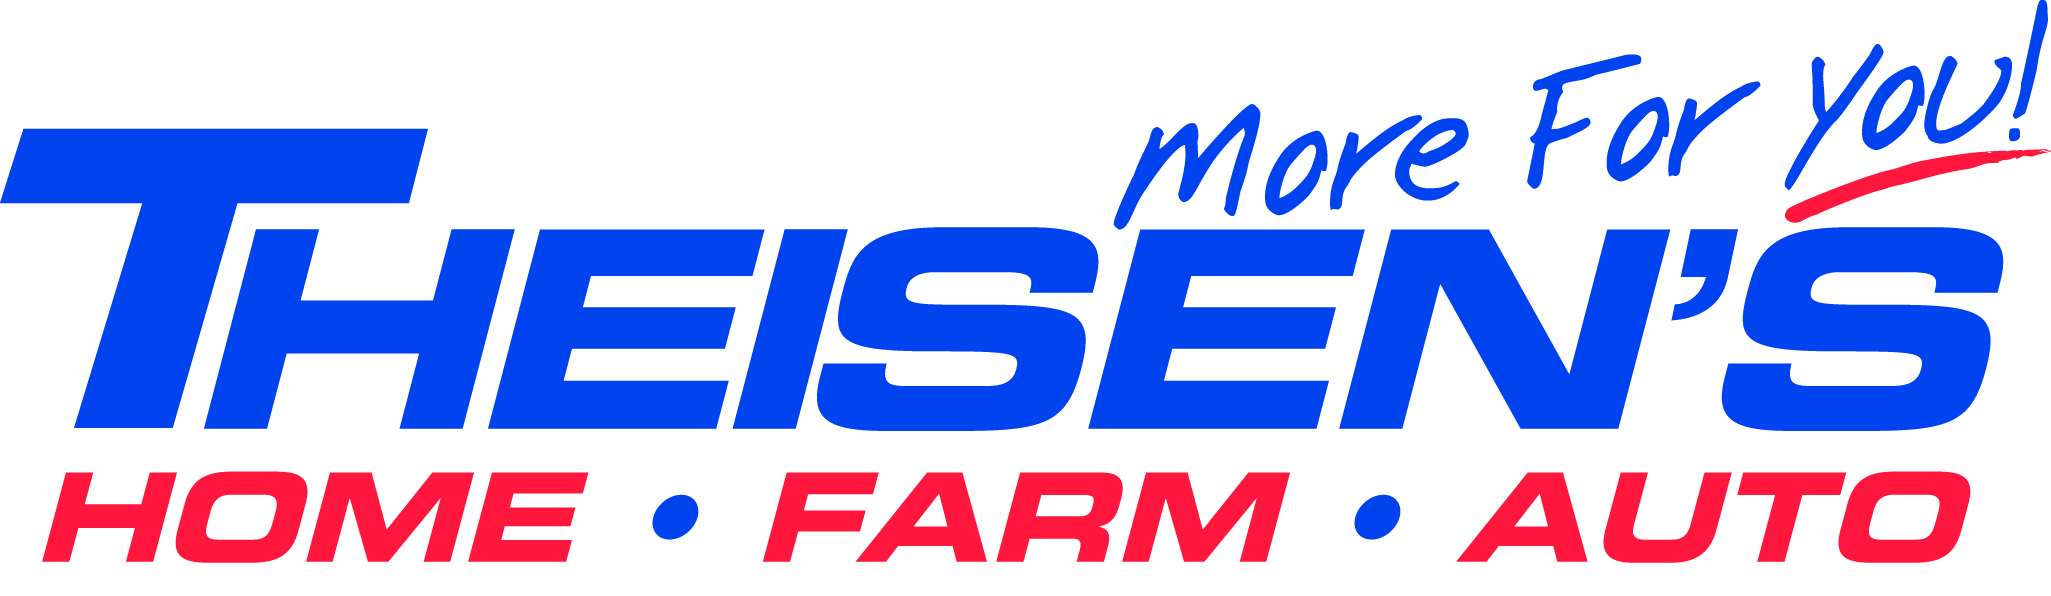 Copy of Theisen logo more for you.jpg